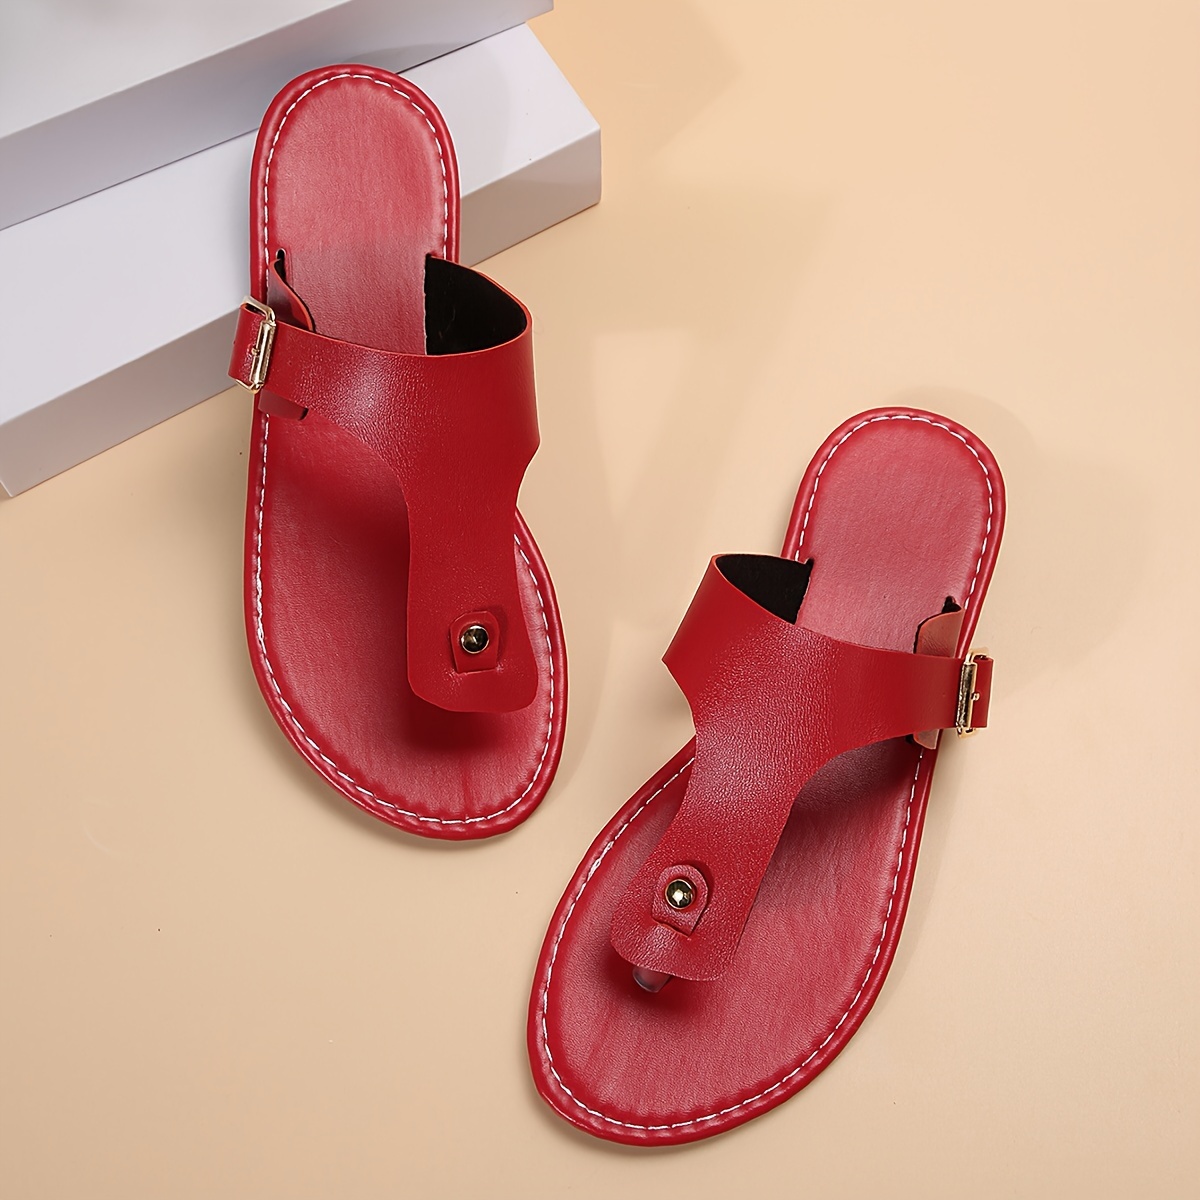 Red leather thongs sandals for men Handmade